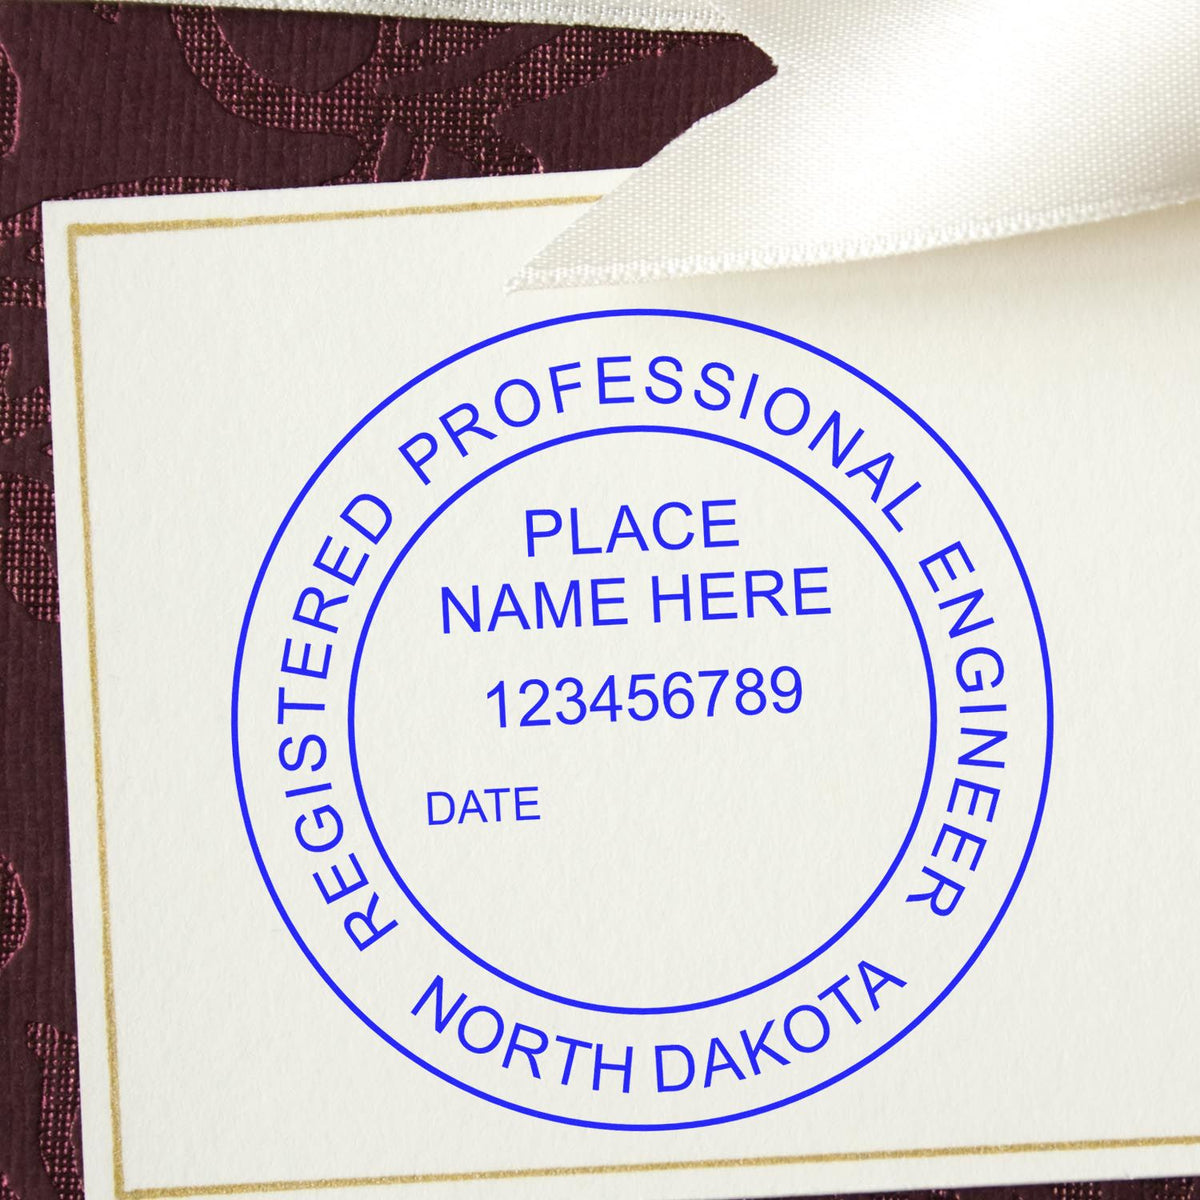 The Digital North Dakota PE Stamp and Electronic Seal for North Dakota Engineer stamp impression comes to life with a crisp, detailed photo on paper - showcasing true professional quality.